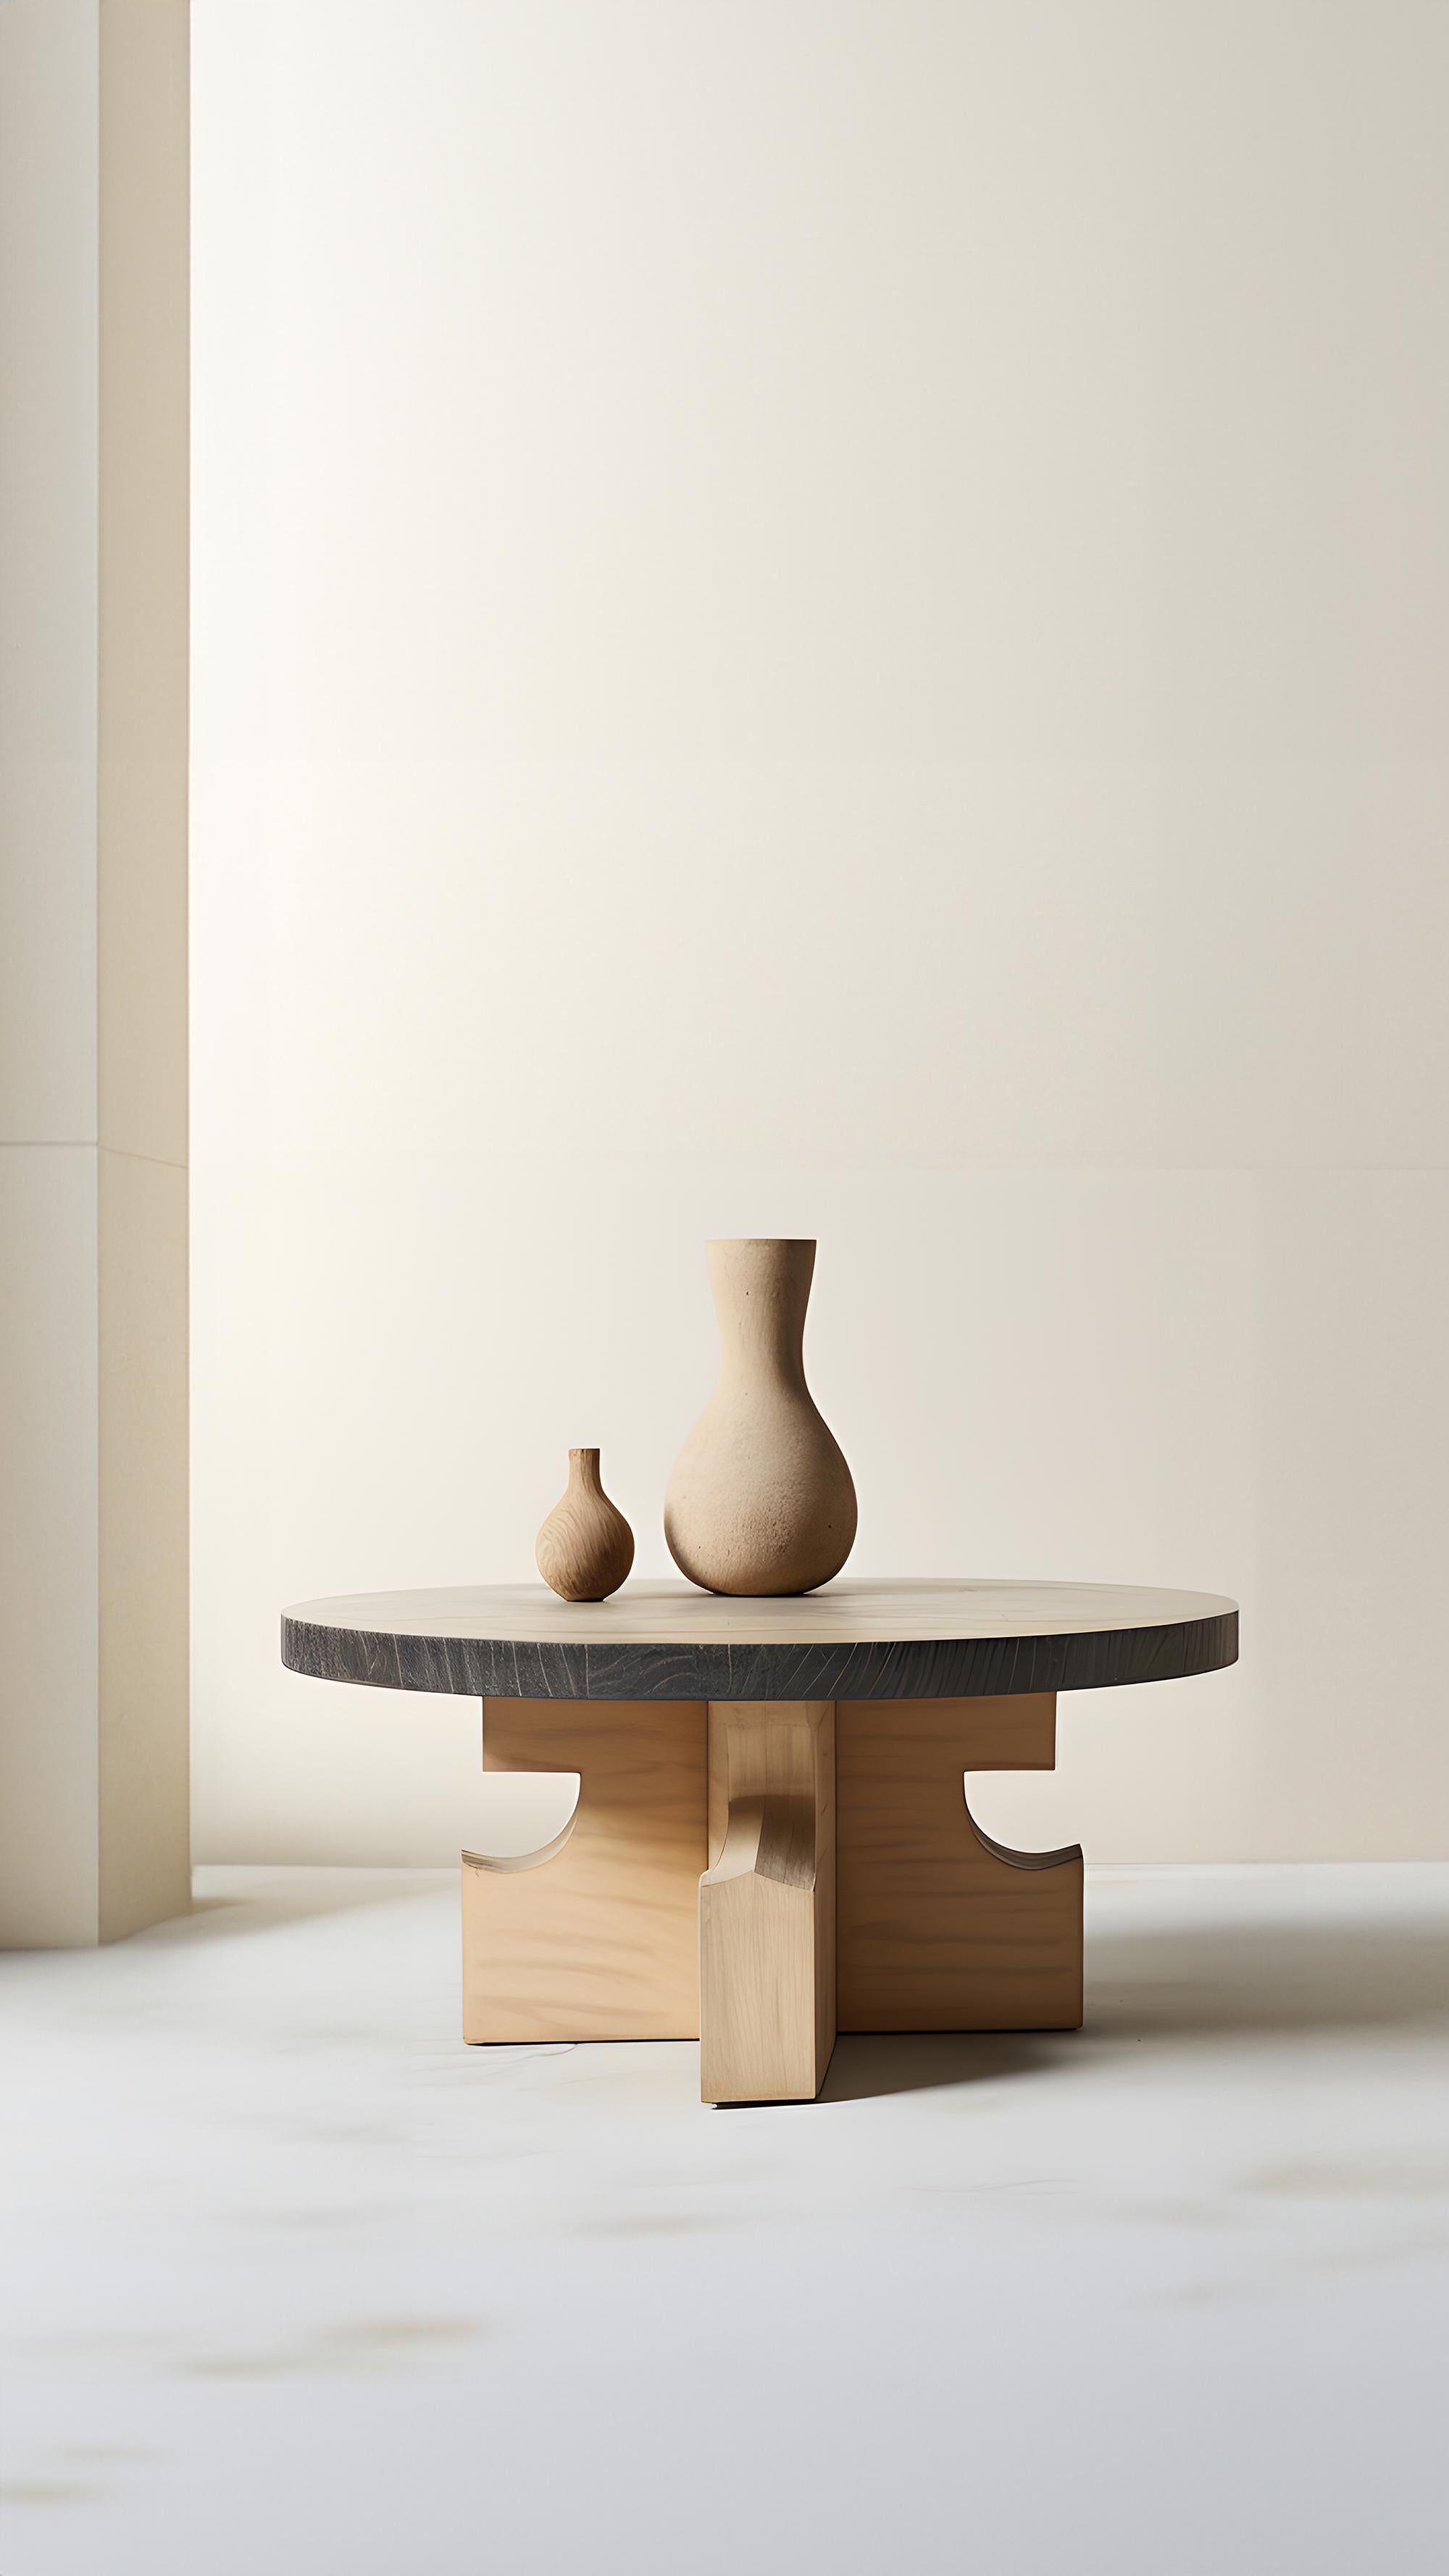 Hardwood Round Oak Fundamenta Table 63 Geometric Flair, Contemporary Look by NONO For Sale